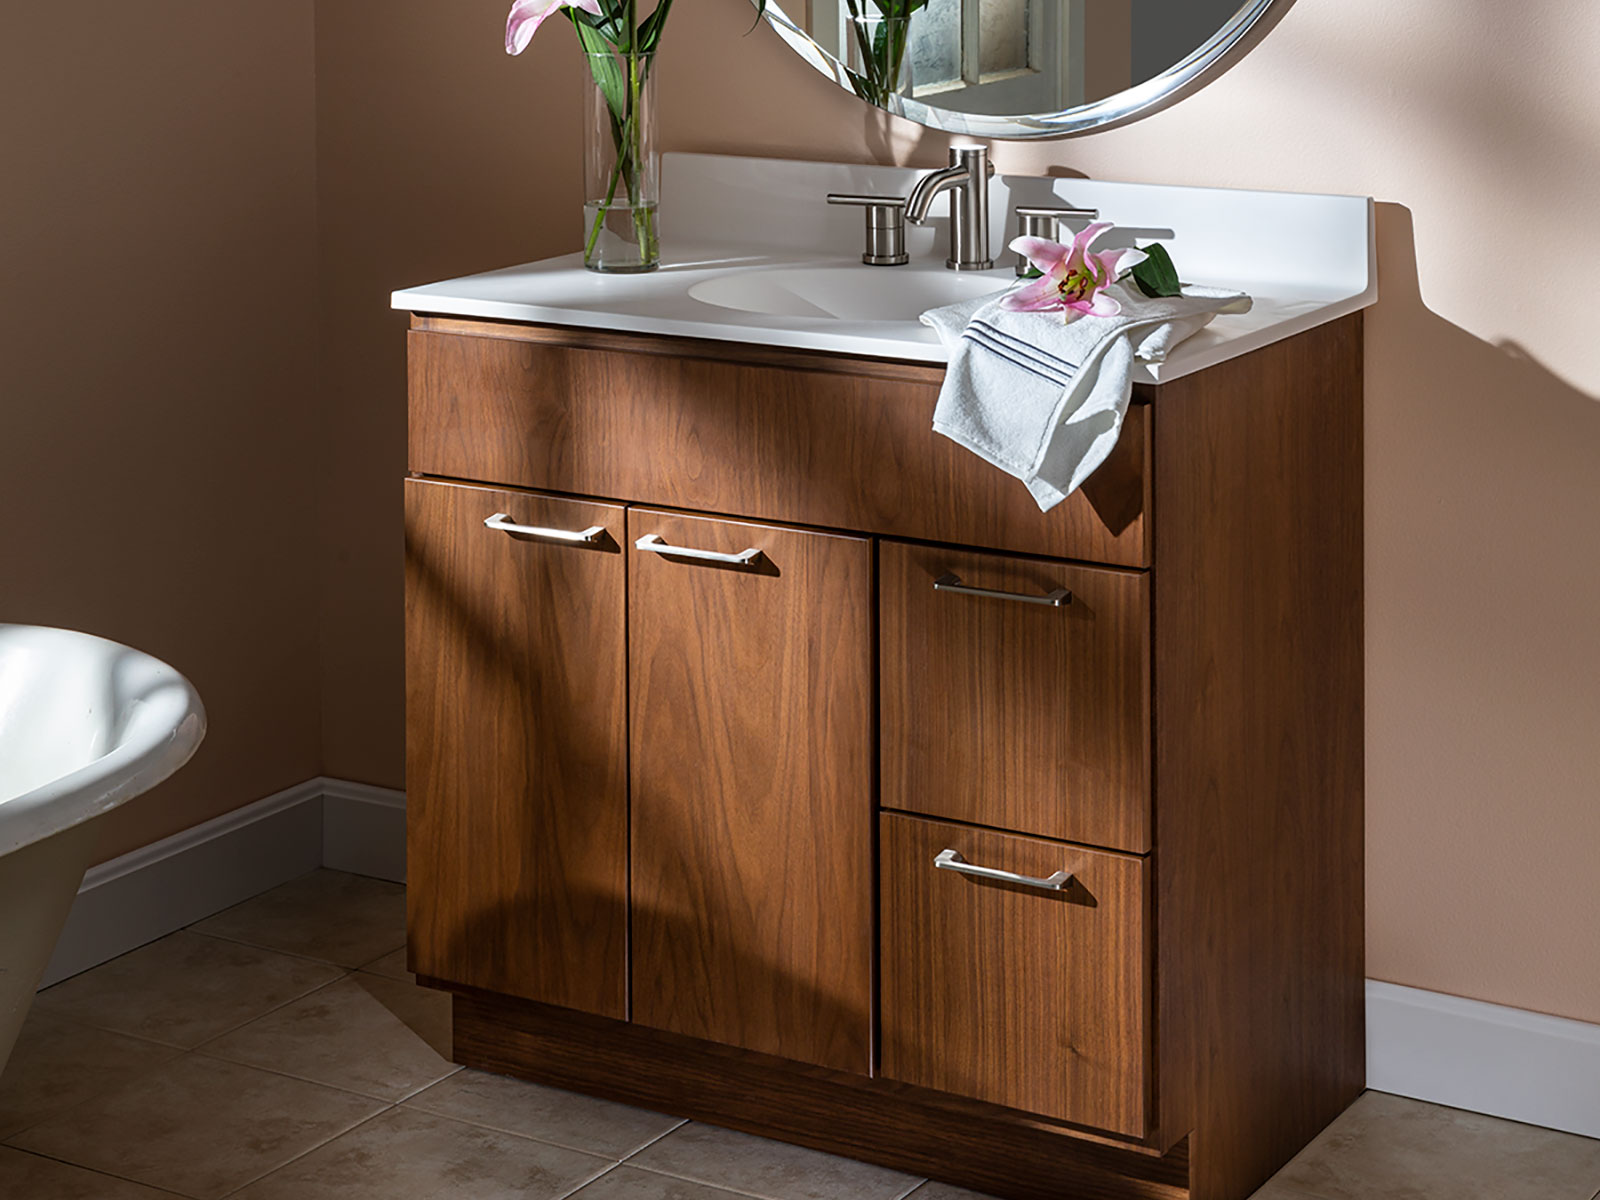 Bath Vanities And Cabinetry, 33 Bathroom Vanity With Drawers